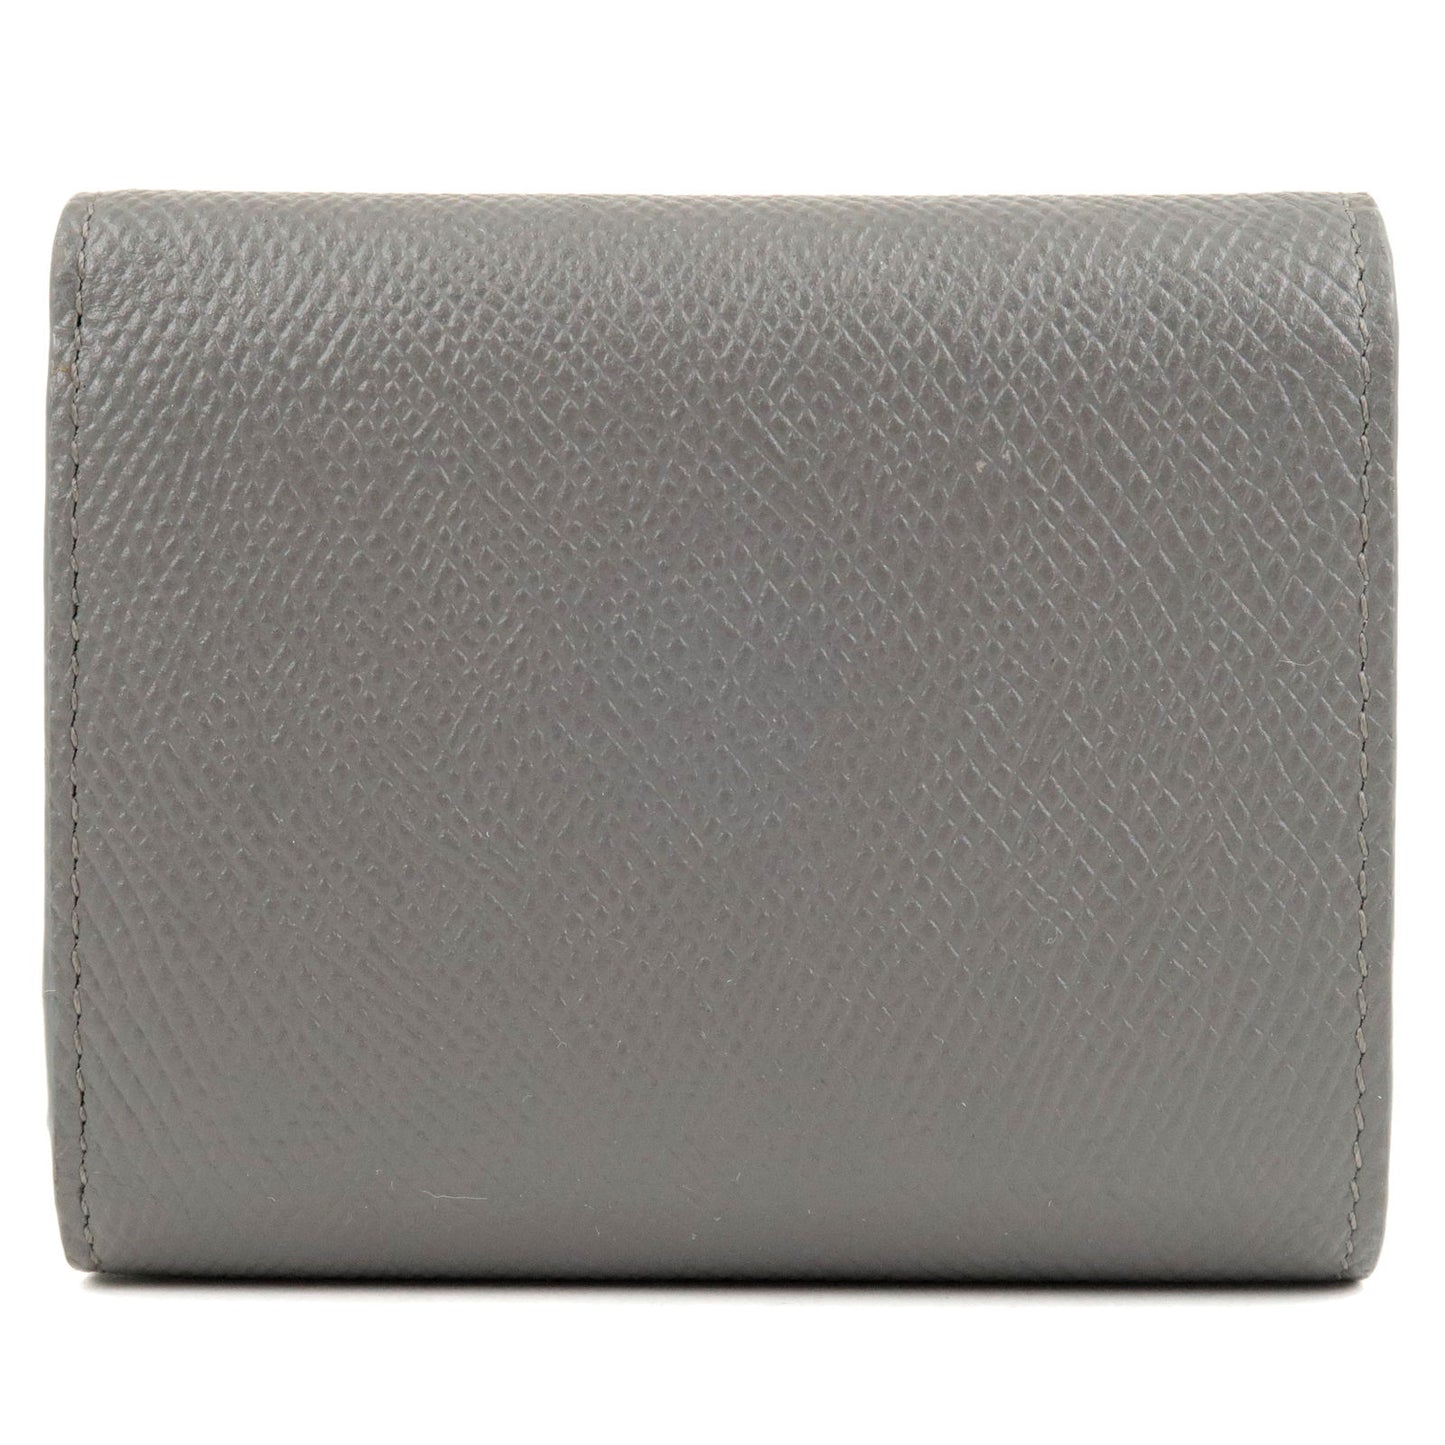 CELINE Leather Tri-fold Compact Small Wallet Gray 10B573